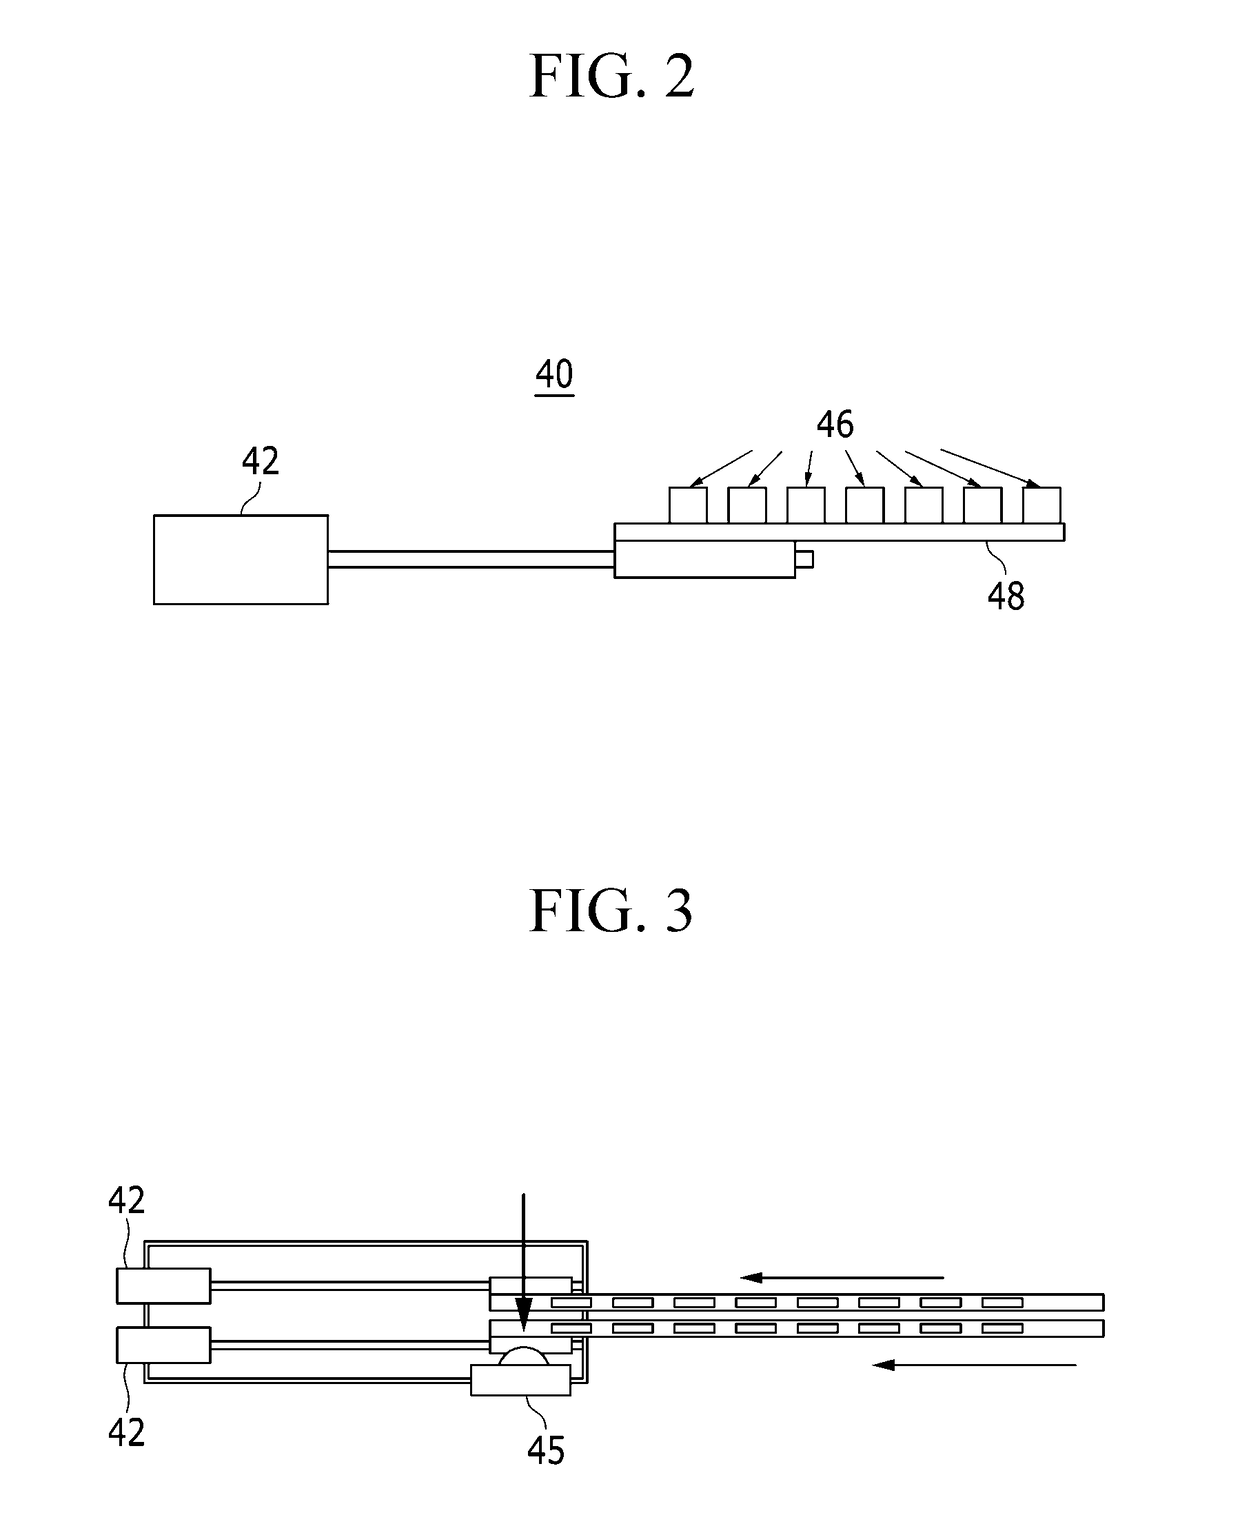 Optical wavelength and power measurement device